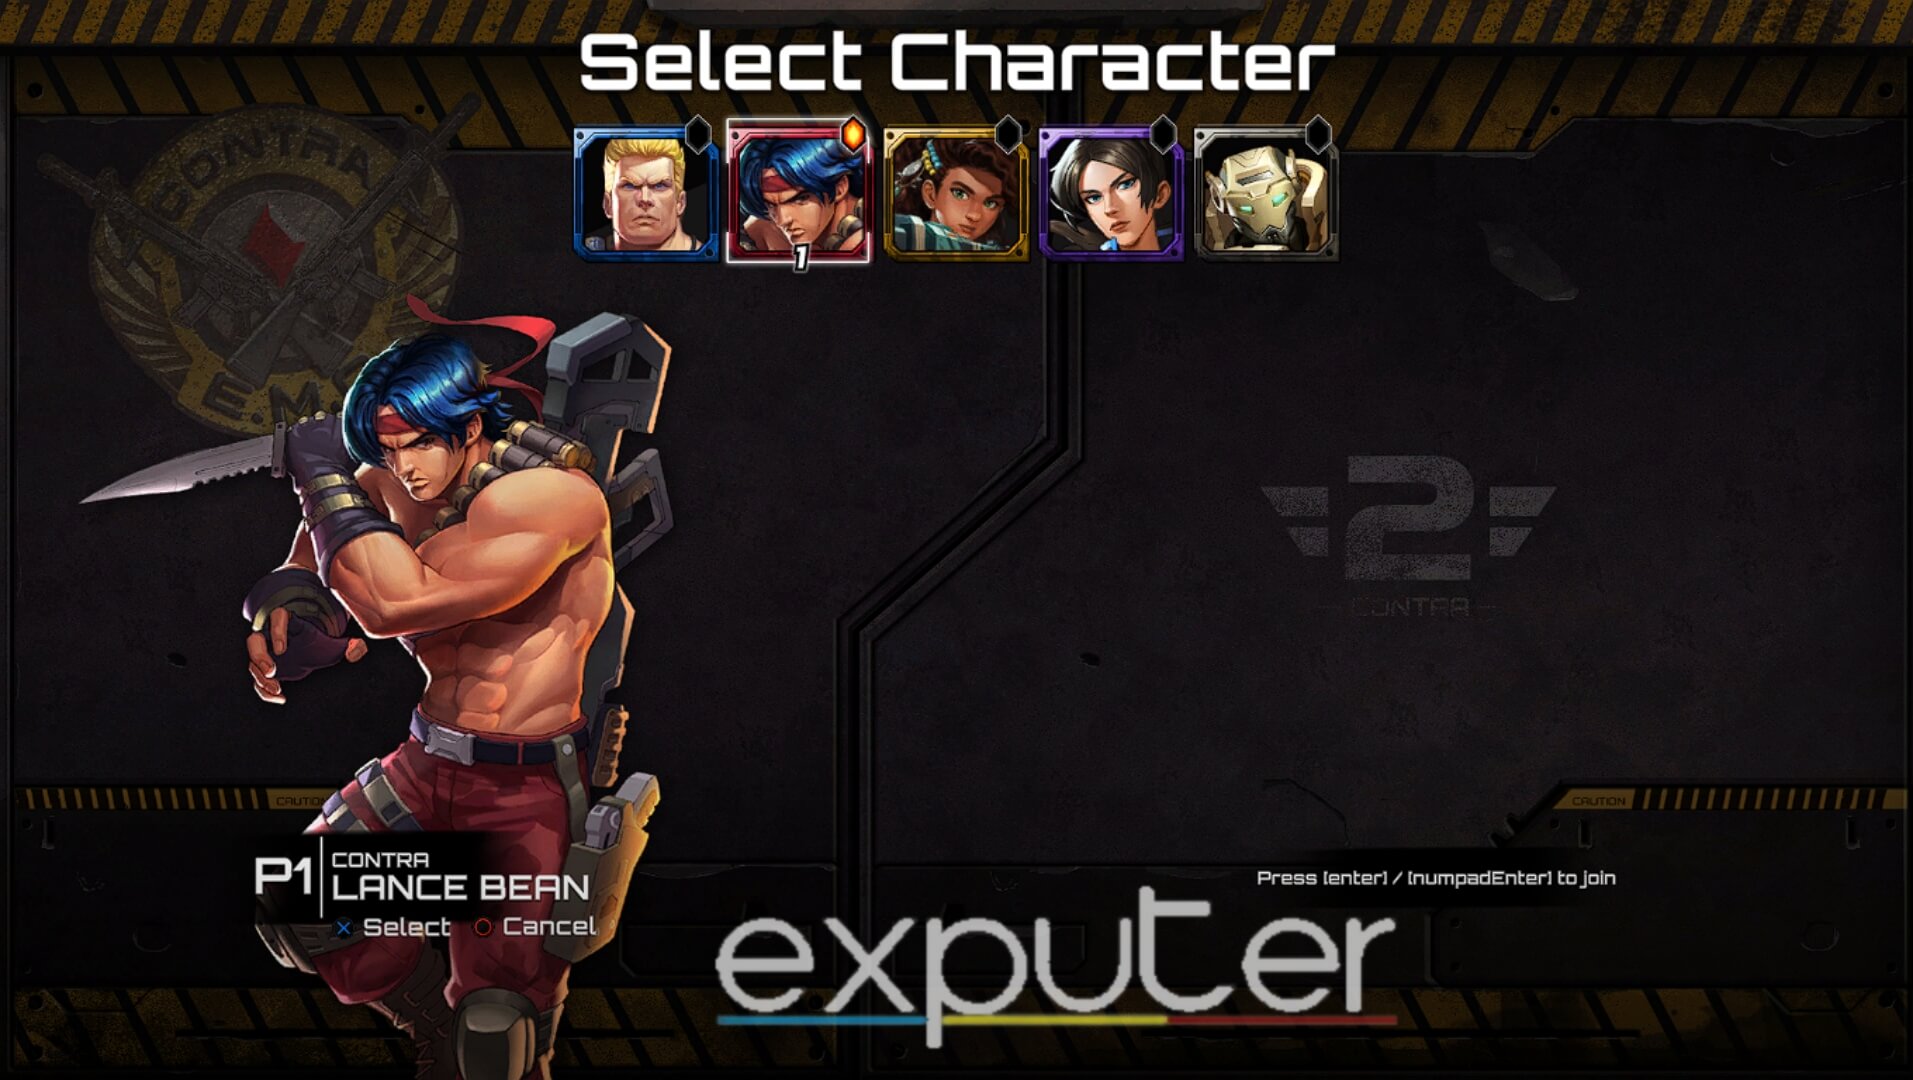 Varied playable characters (image by eXputer)